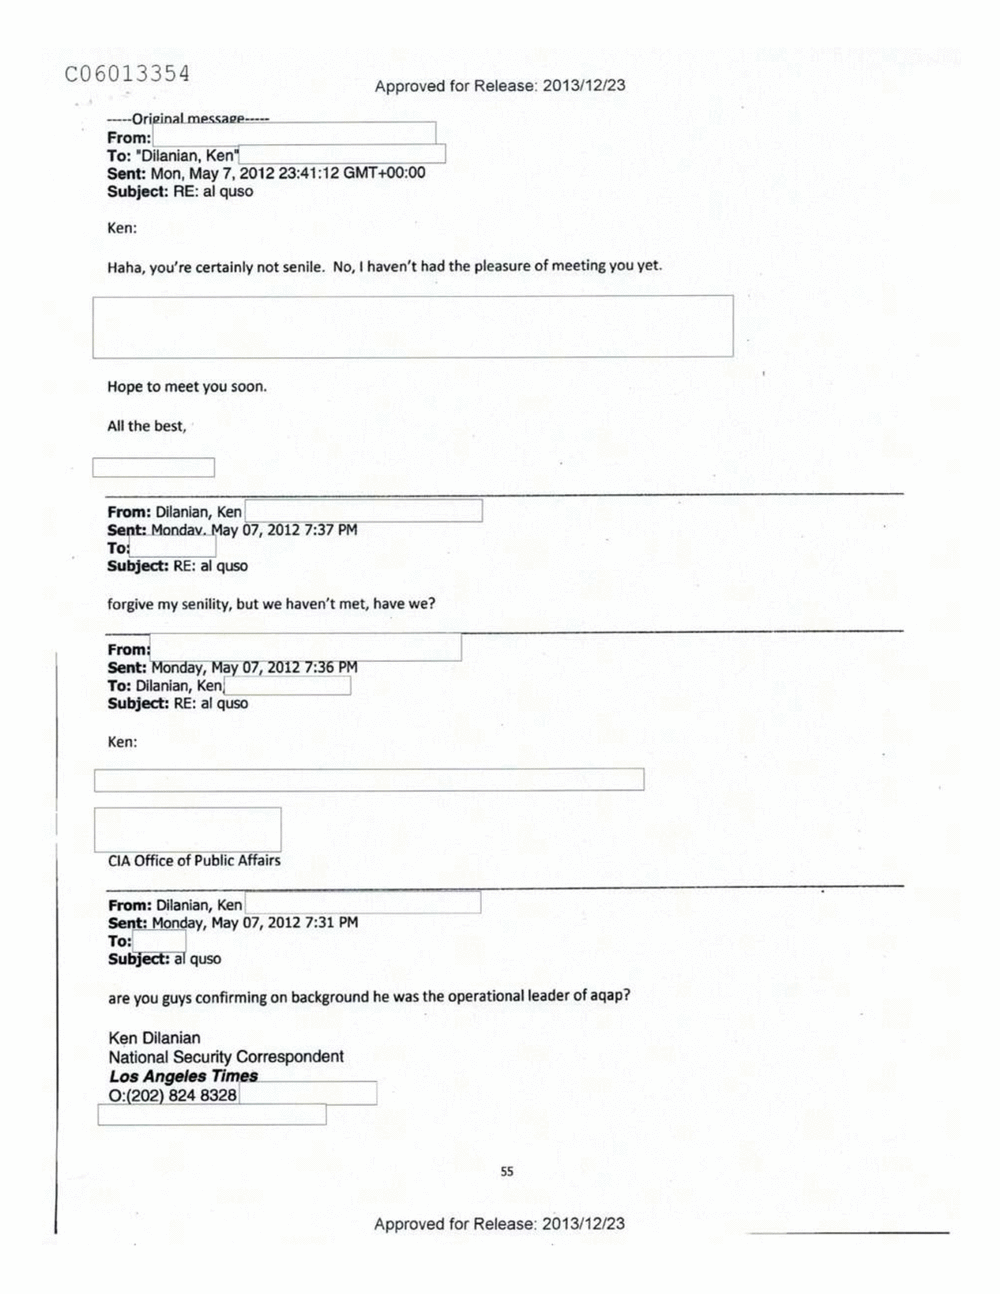 Page 273 from Email Correspondence Between Reporters and CIA Flacks